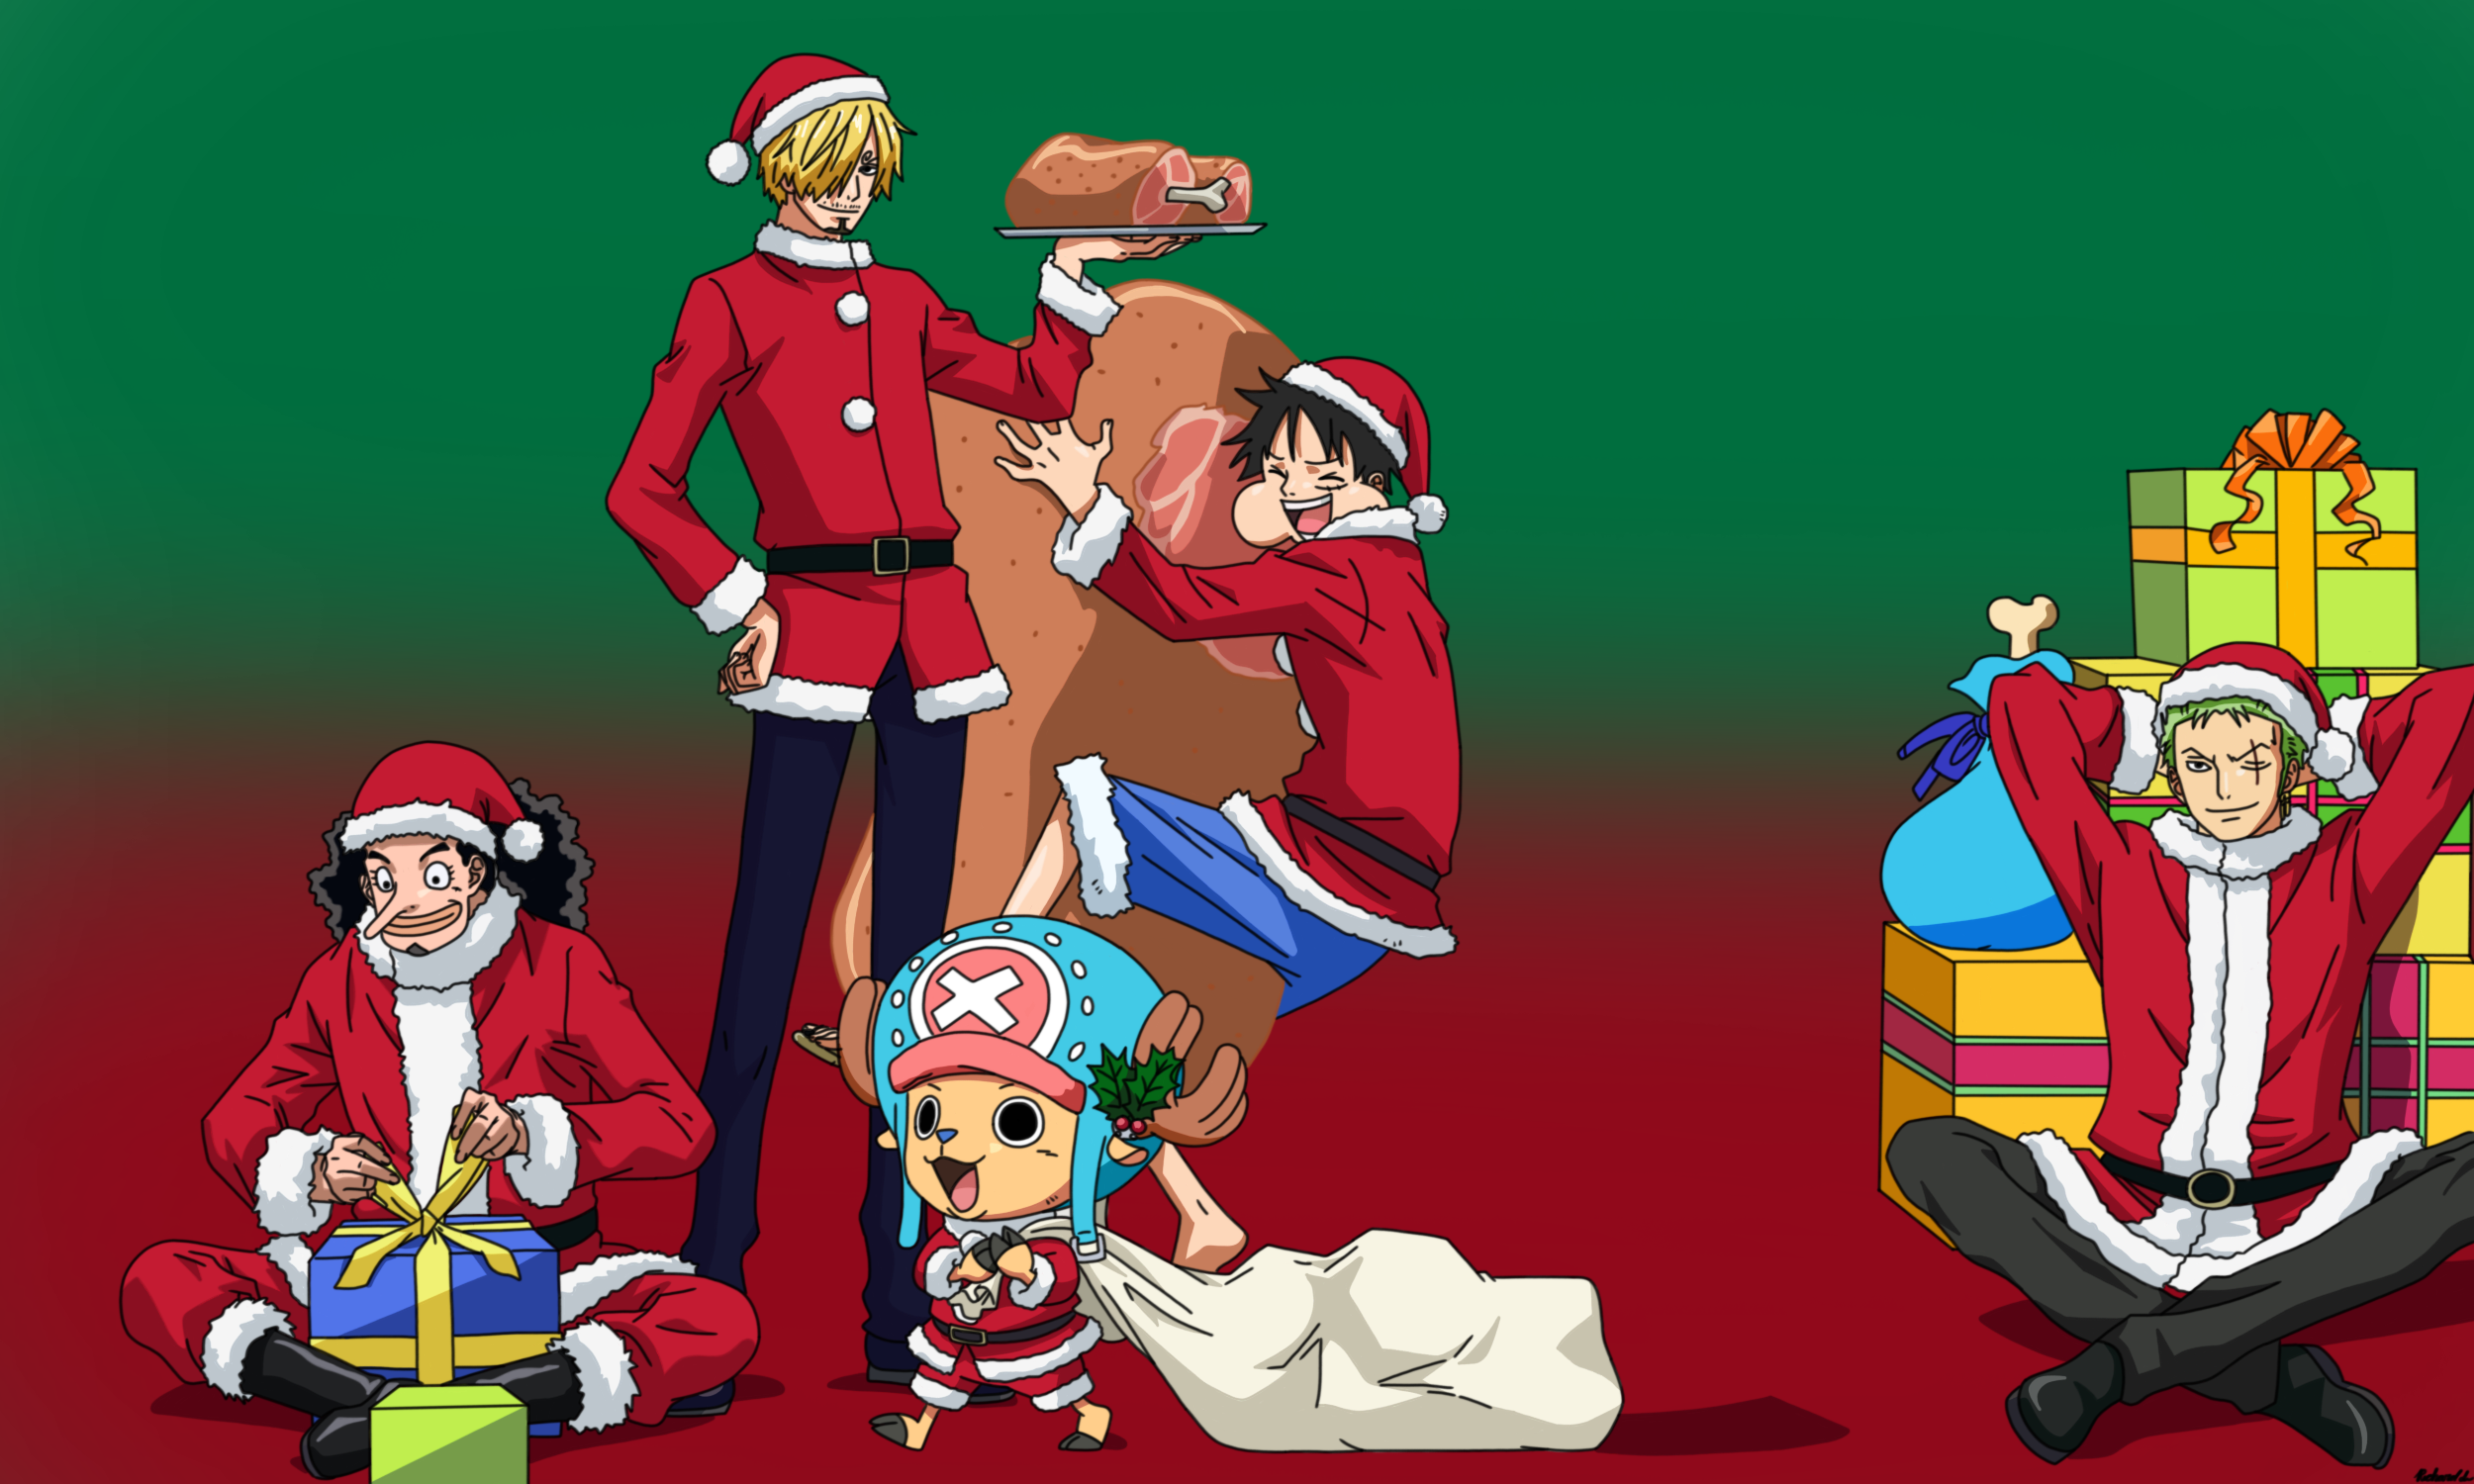 animals of one piece 🏴‍☠️ on X: merry christmas and happy holidays from  your favorite mugiwaras! 🤗  / X